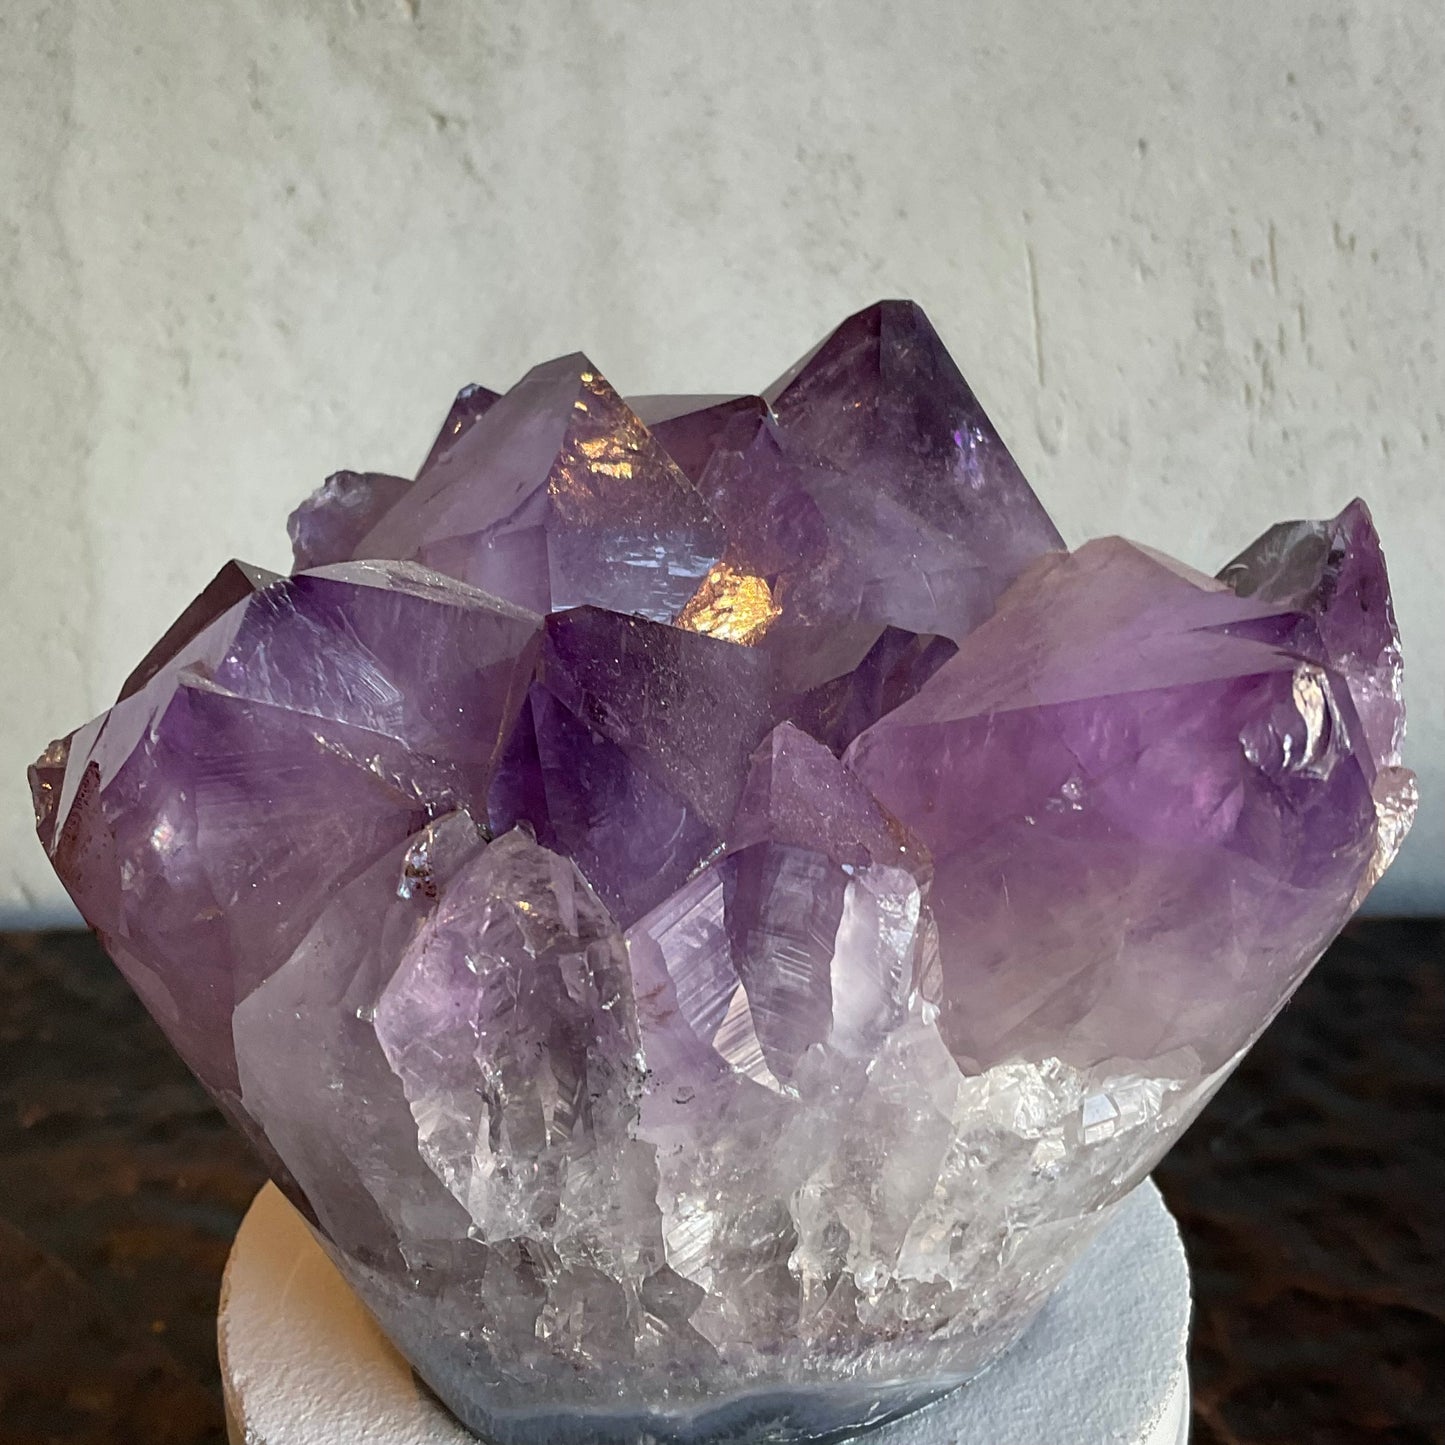 Amethyst Geode Lid Candle